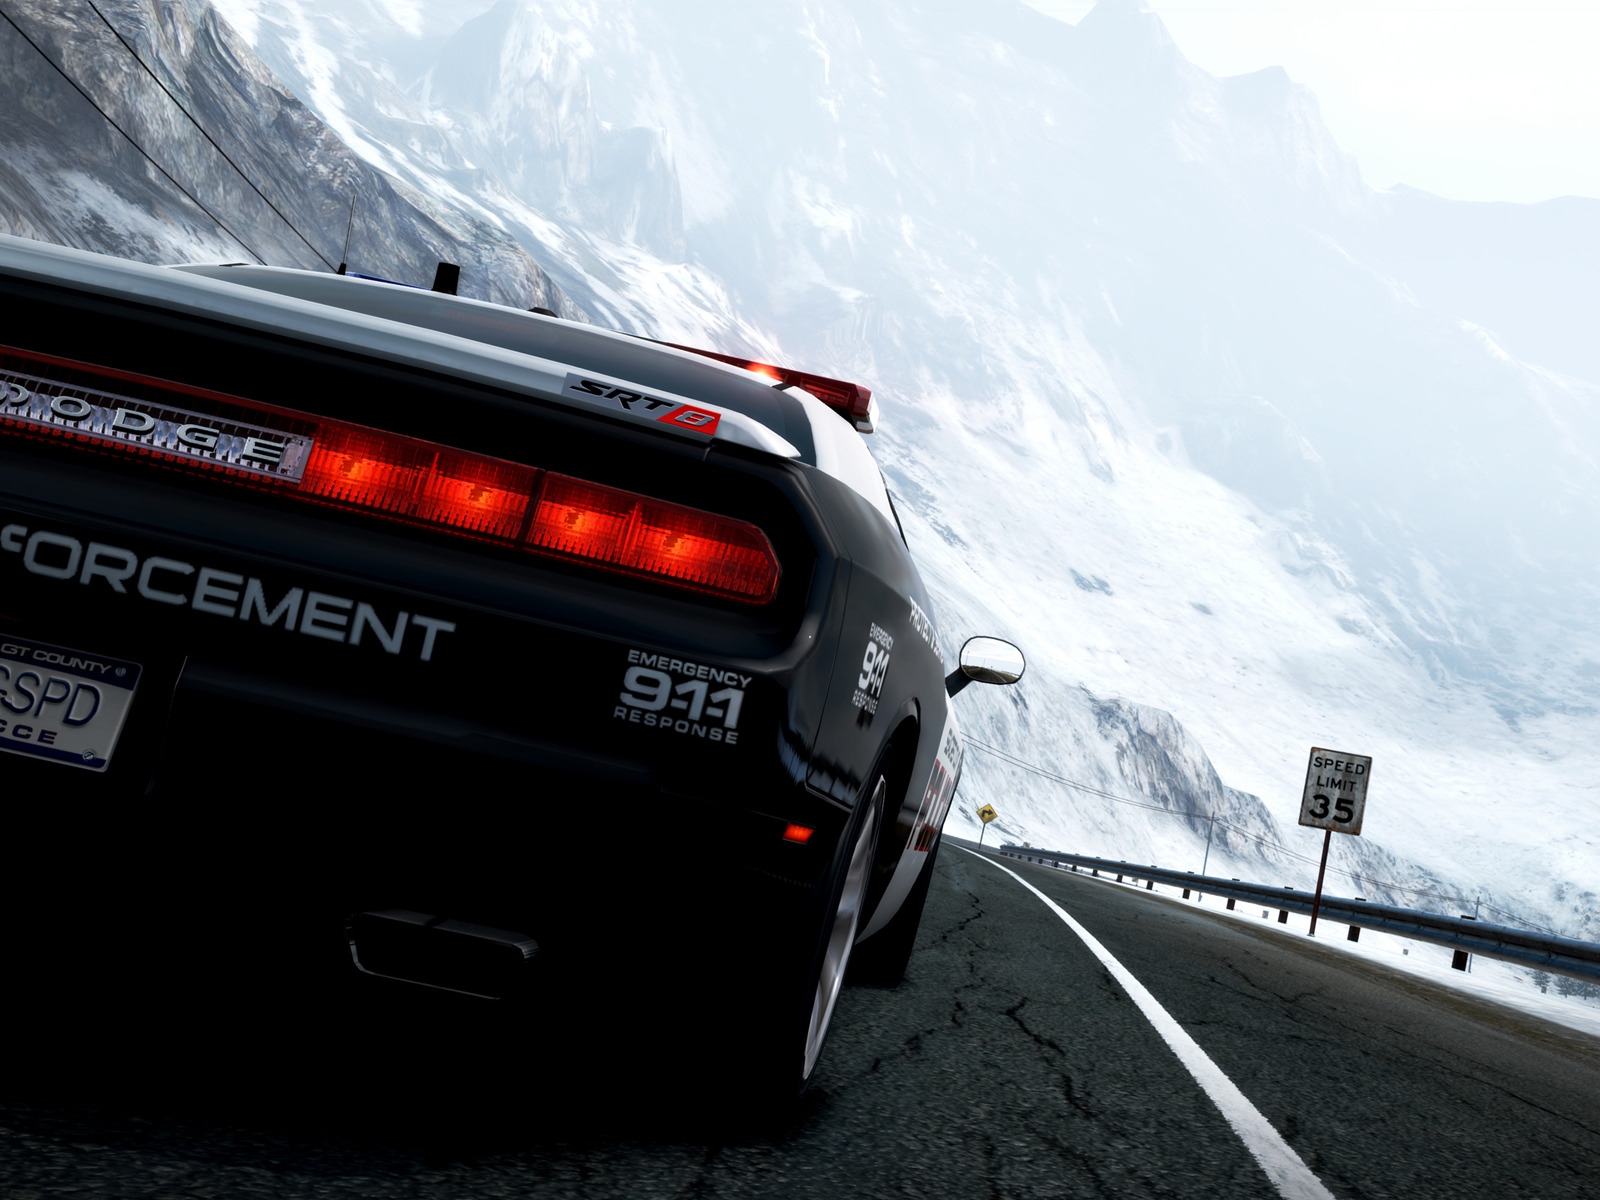 NFS Hot Pursuit Police Car for 1600 x 1200 resolution